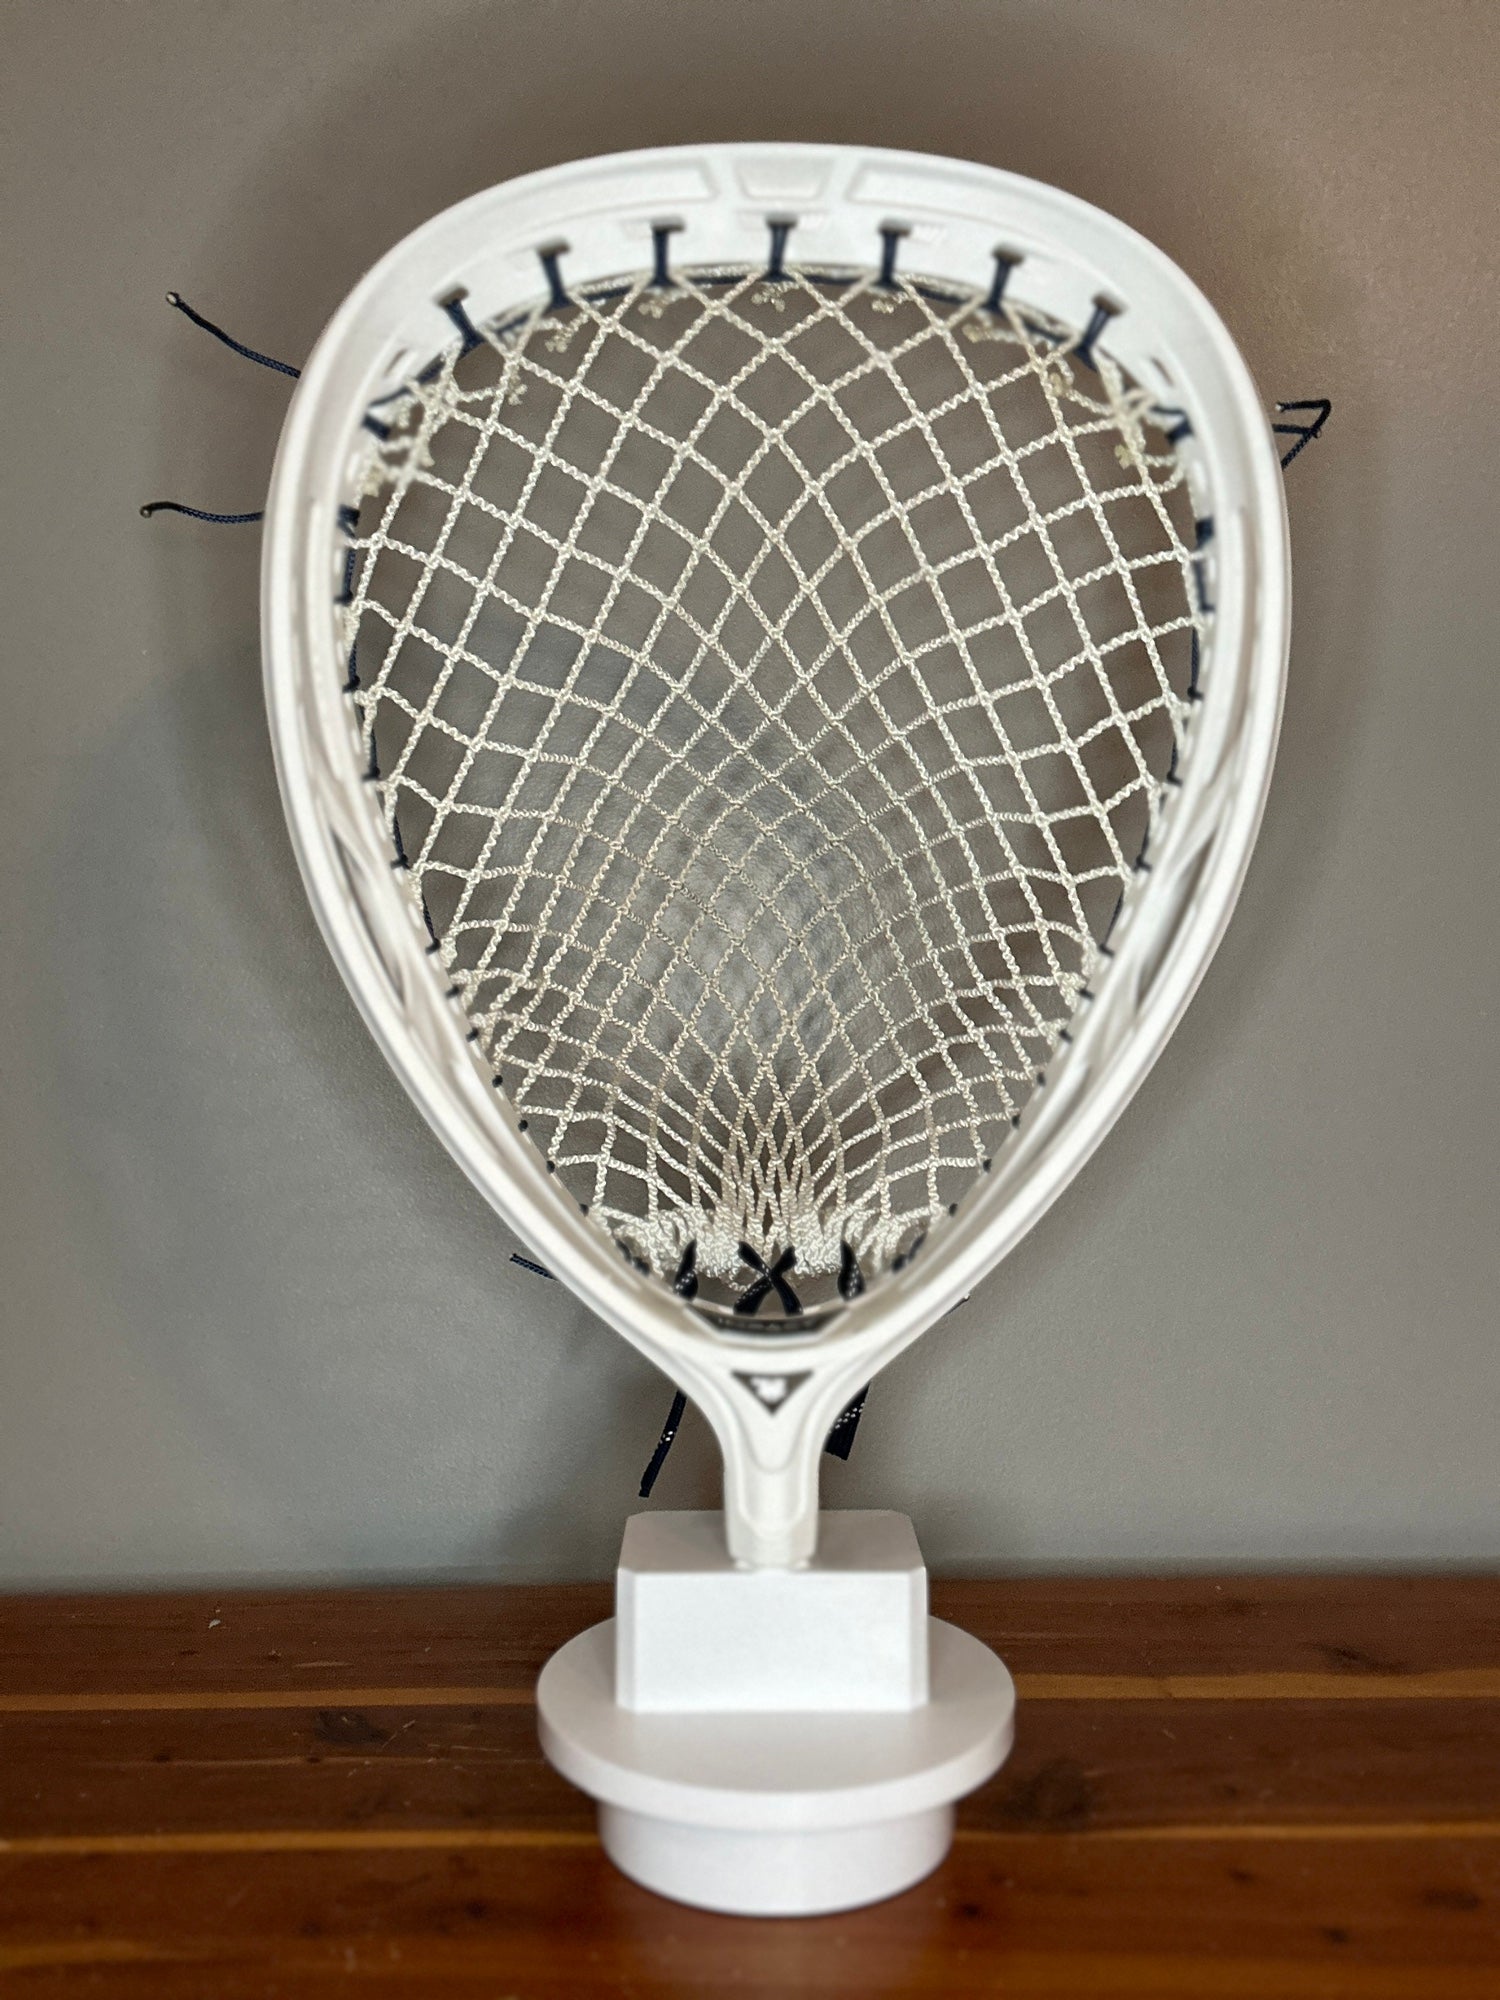 New ECD Impact Goalie Head strung with Impact Mesh, Stylin String's ow